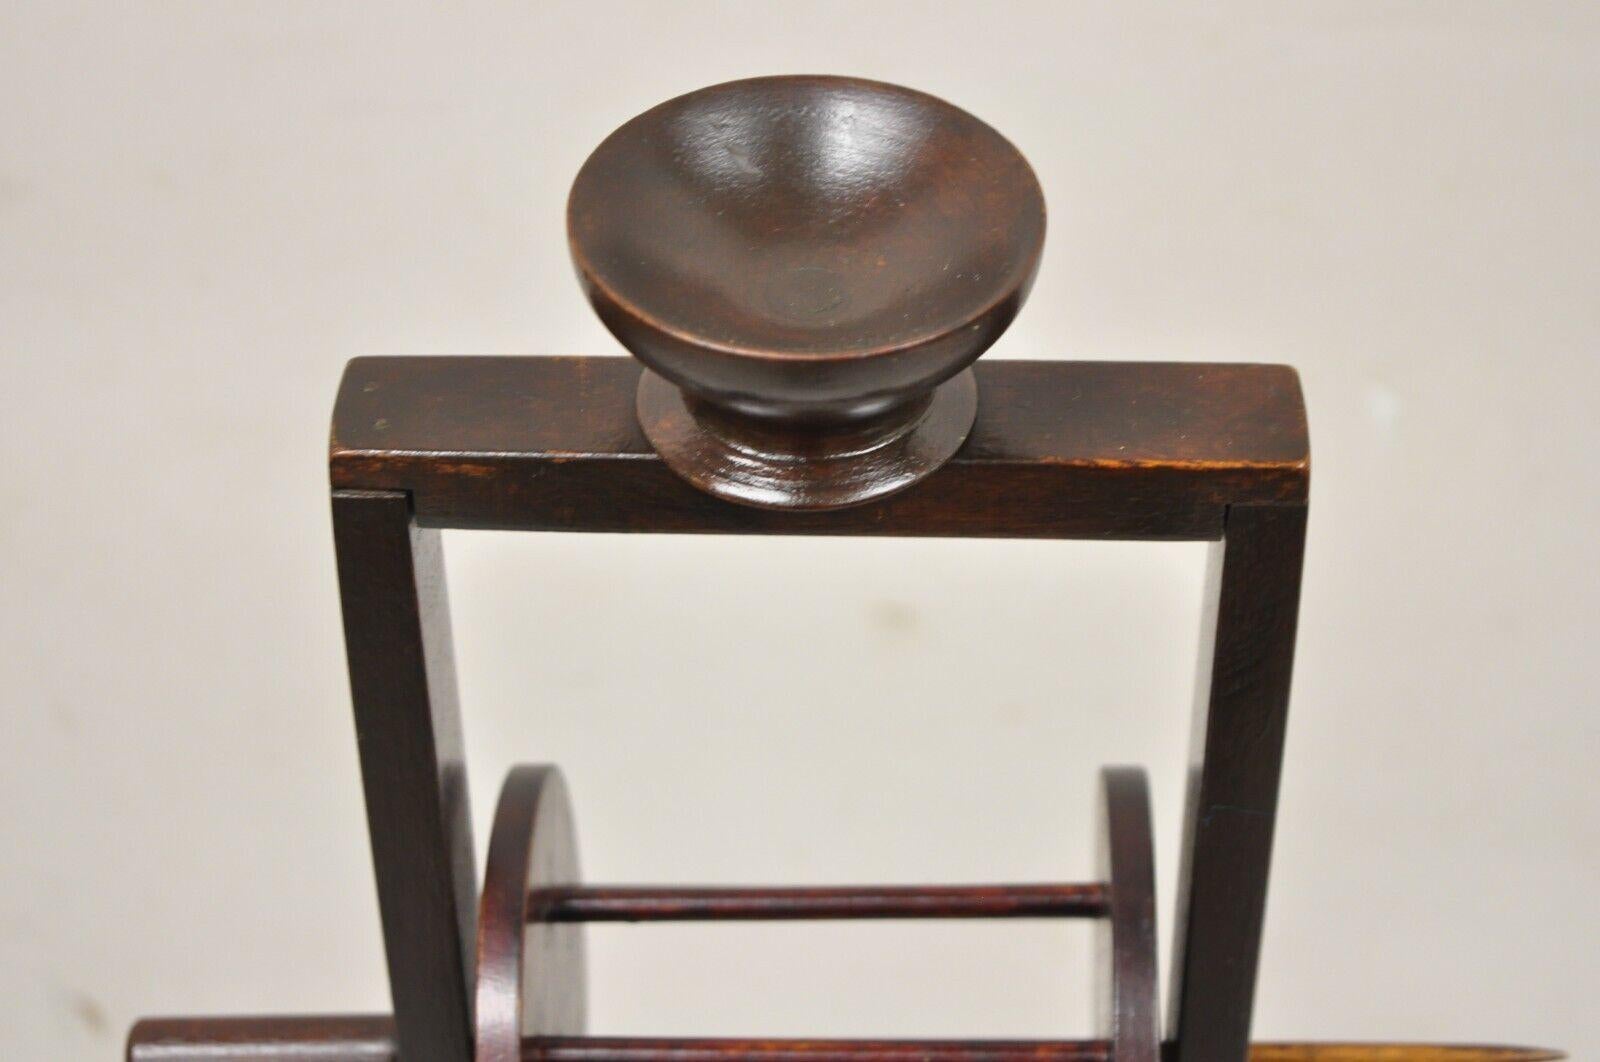 Antique American Primitive Mahogany Handmade Wool Winder Spool Thread Stand In Good Condition For Sale In Philadelphia, PA